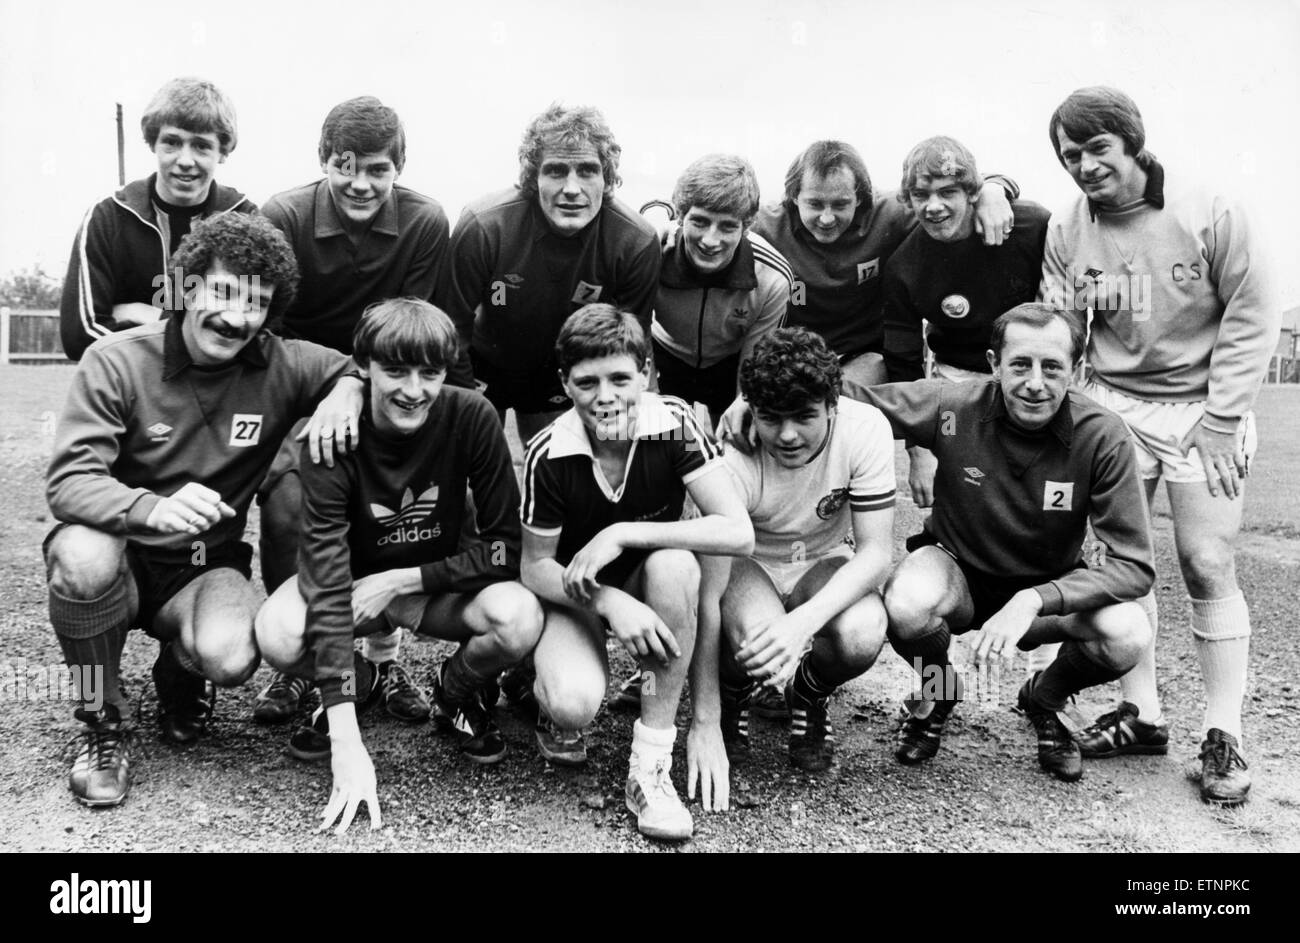 Newcastle United 1982. Togetherness, Newcastle United kids and big names. Back Row left to right, Brian Tillon, Jeff Wrightson, Jeff Clarke, Stephen Forster, David McCreery, Tony Hayton, Colin Suggett youth team coach. Front Row left to right, Terry McDermott, Brian Kilford, Paul Gascoigne, Ian Bogie and Mick Martin. 25th October 1982. Stock Photo